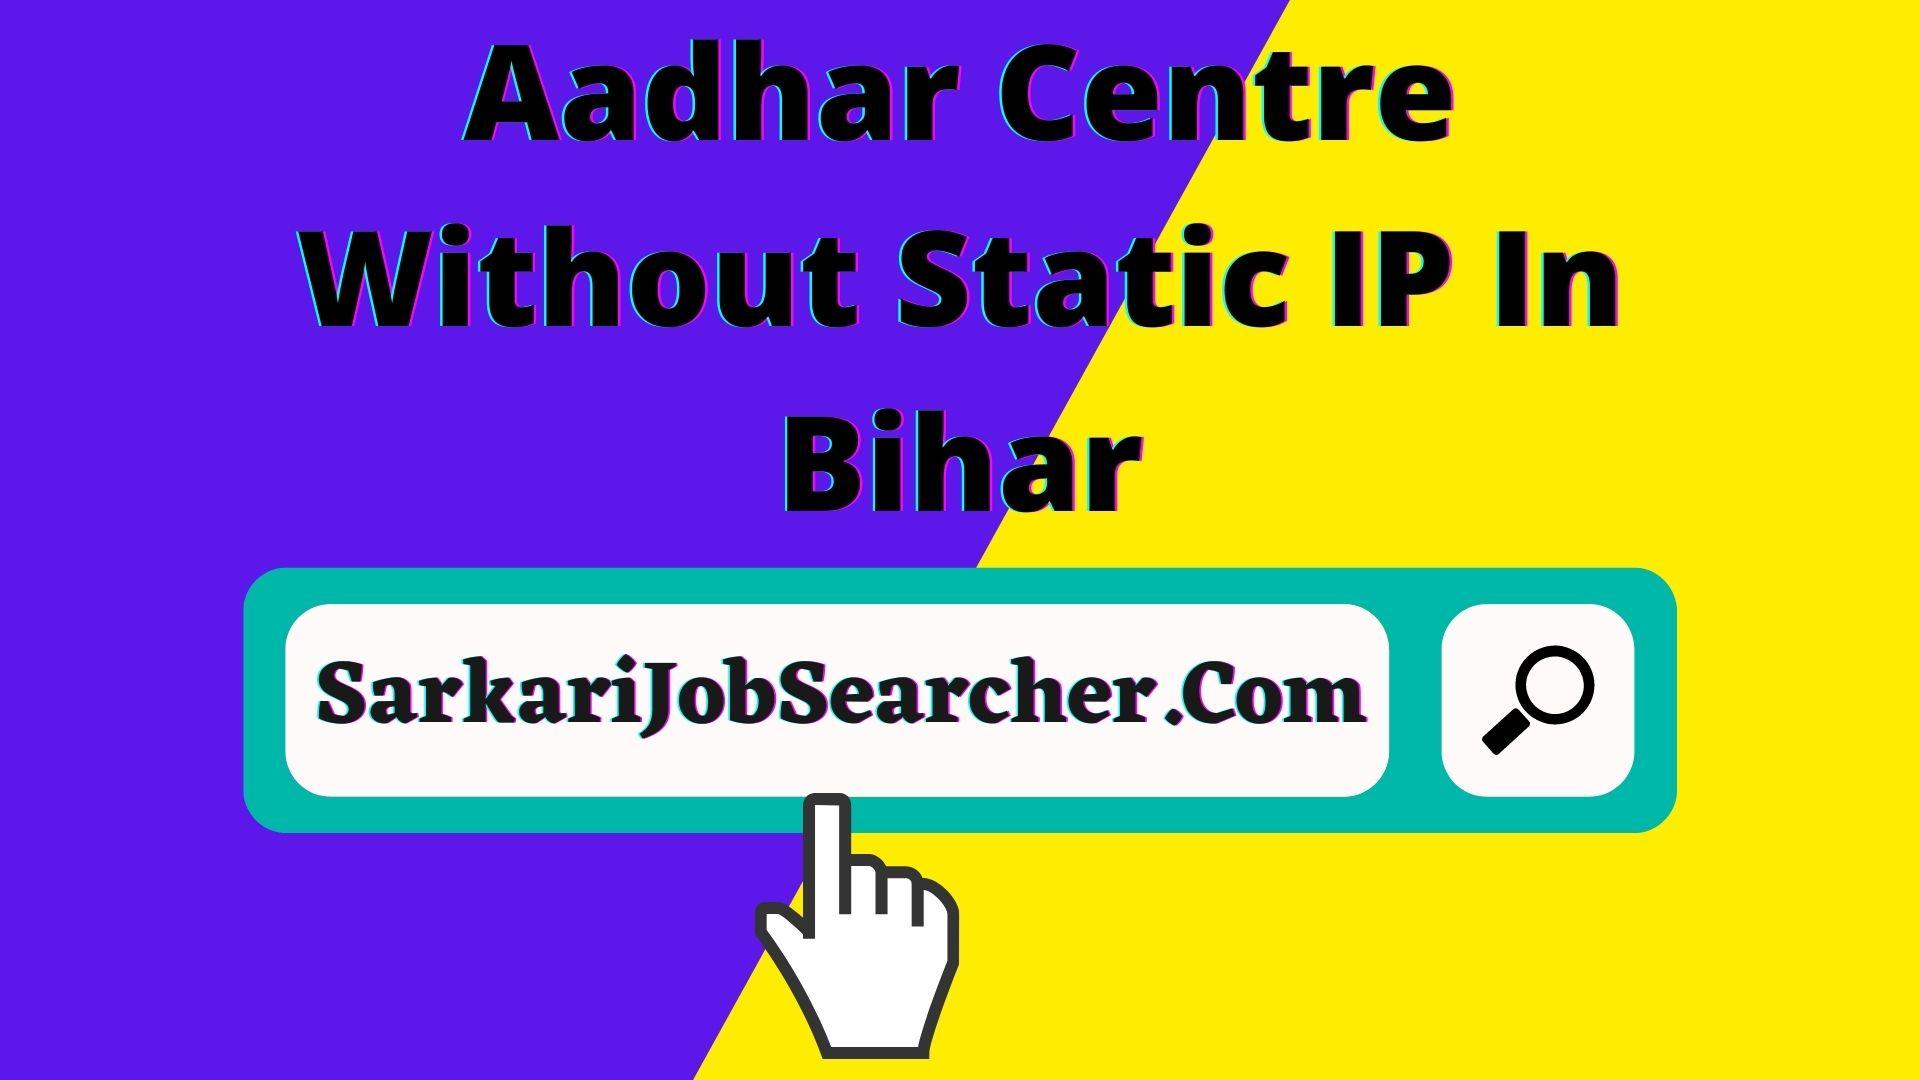 Aadhar Centre Without Static IP In Bihar